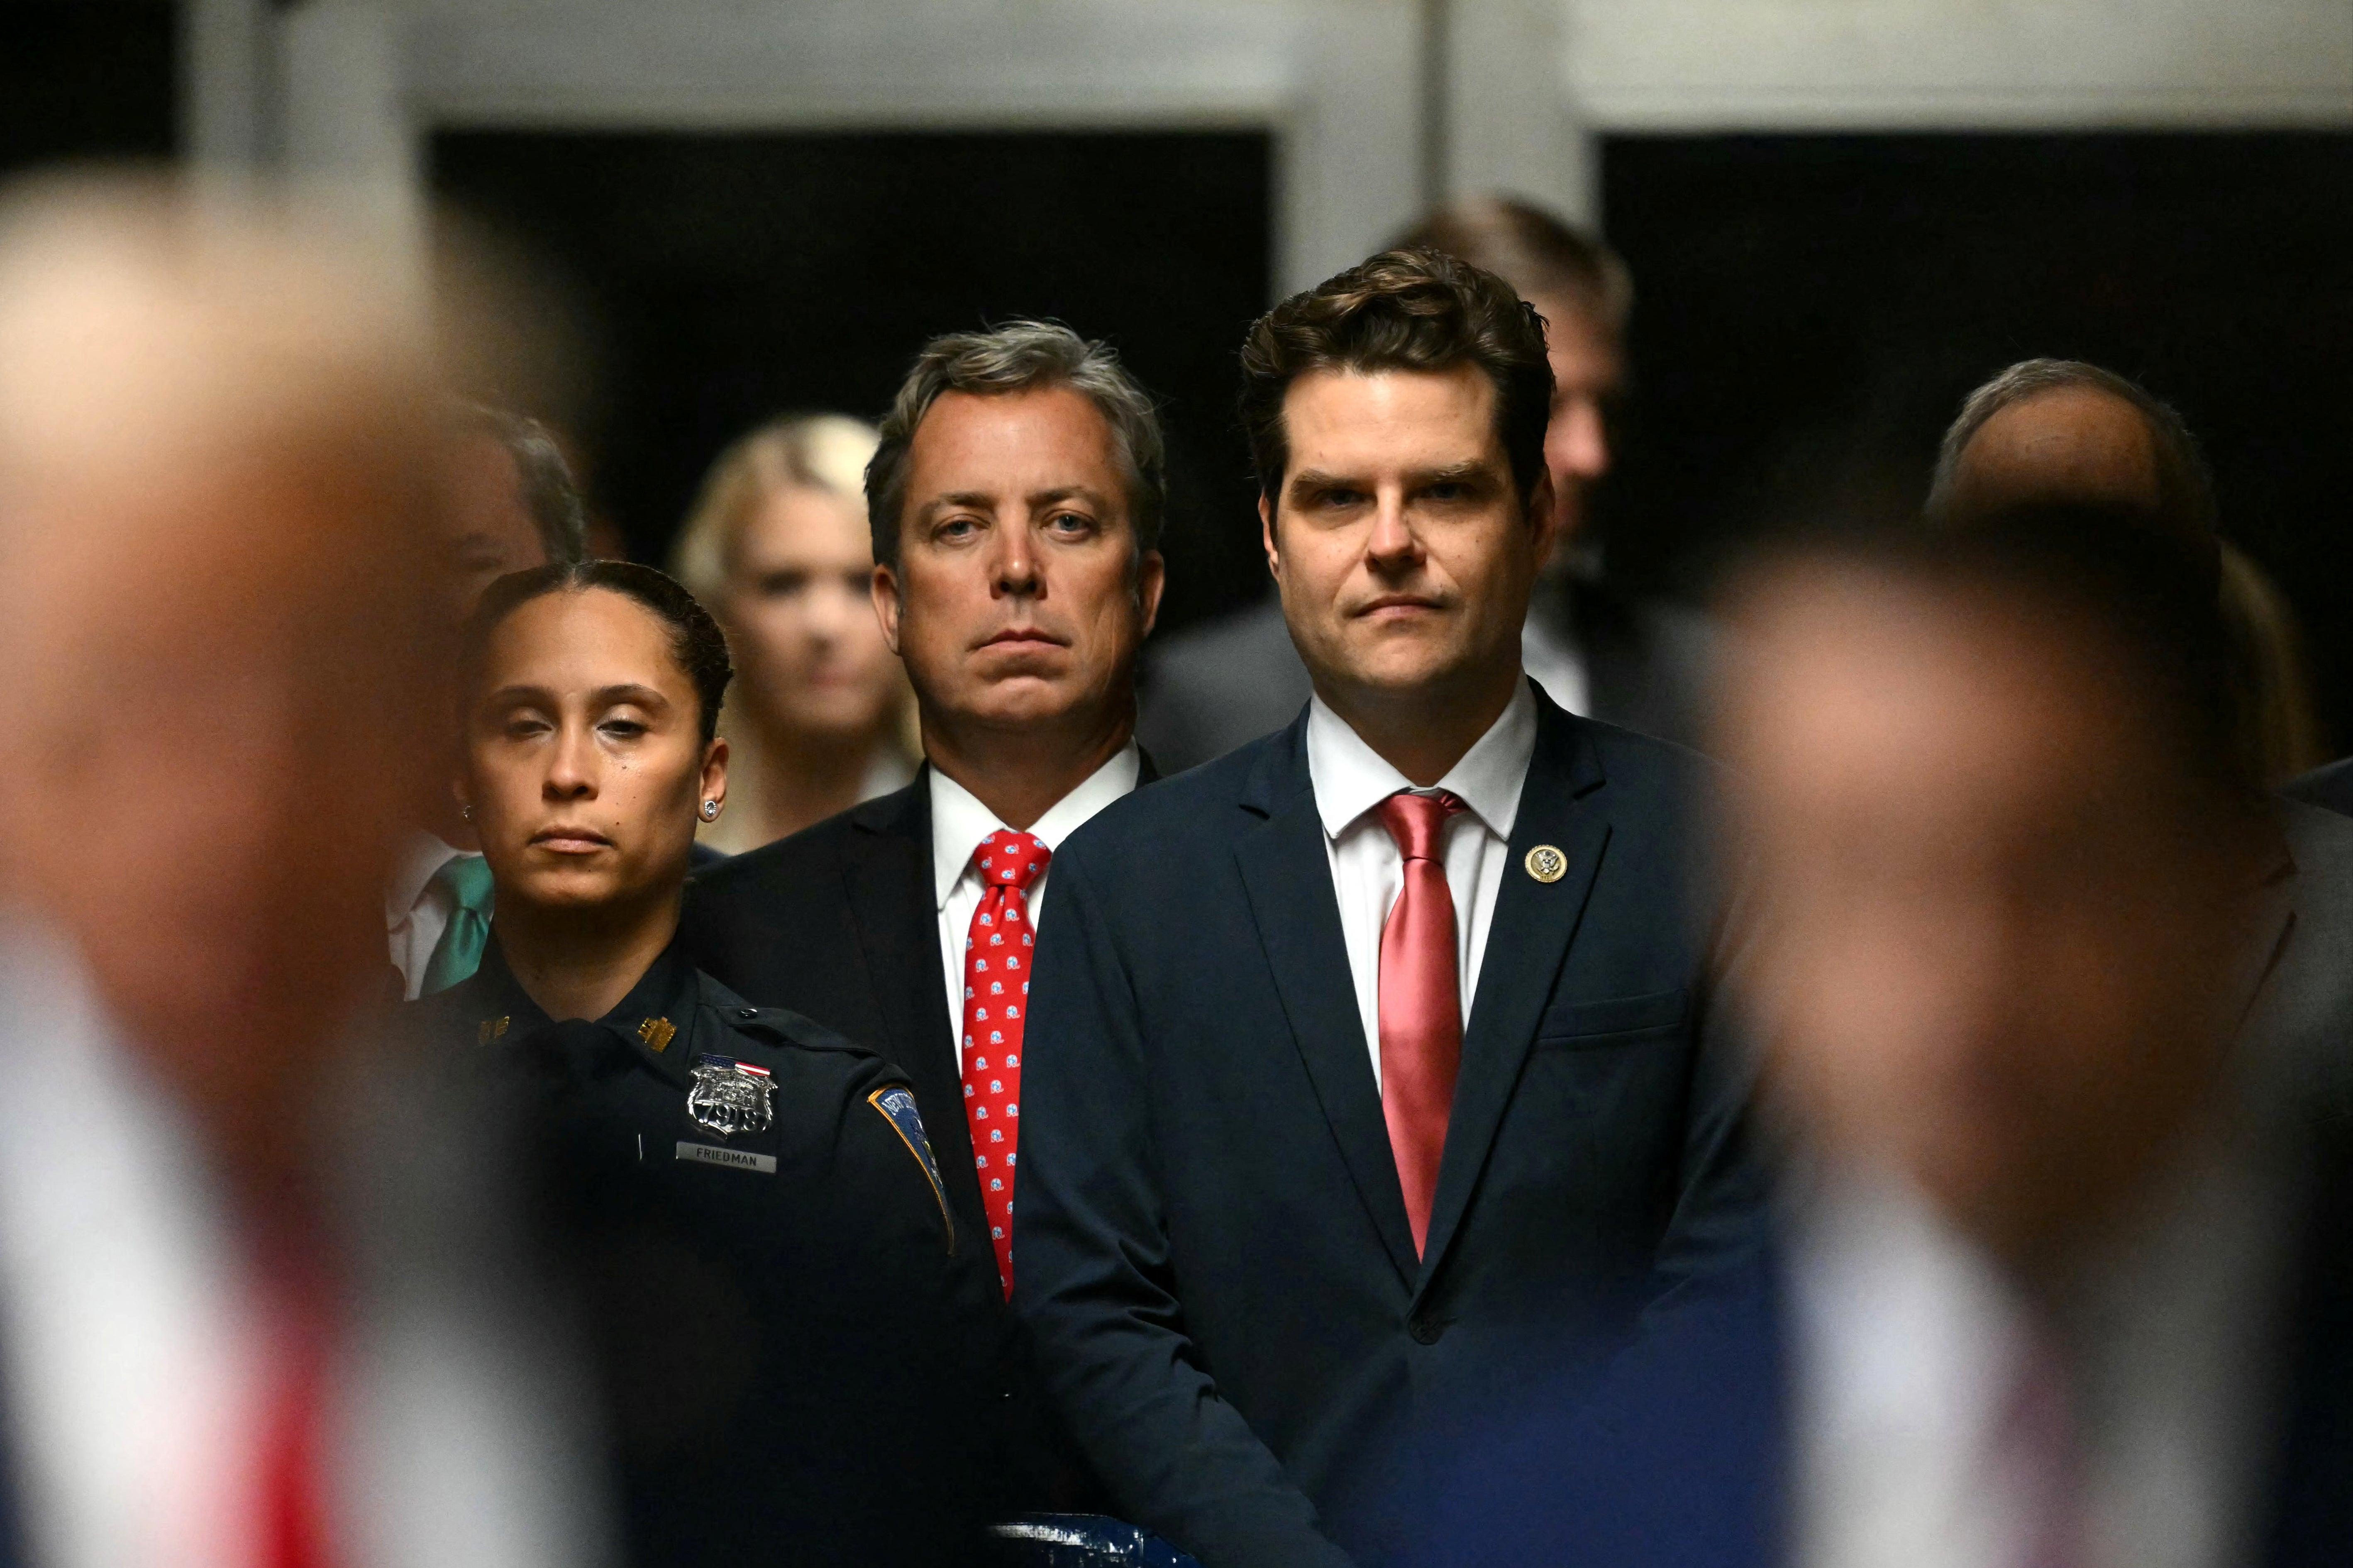 Matt Gaetz in the courthouse for Donald Trump’s trial on 16 May